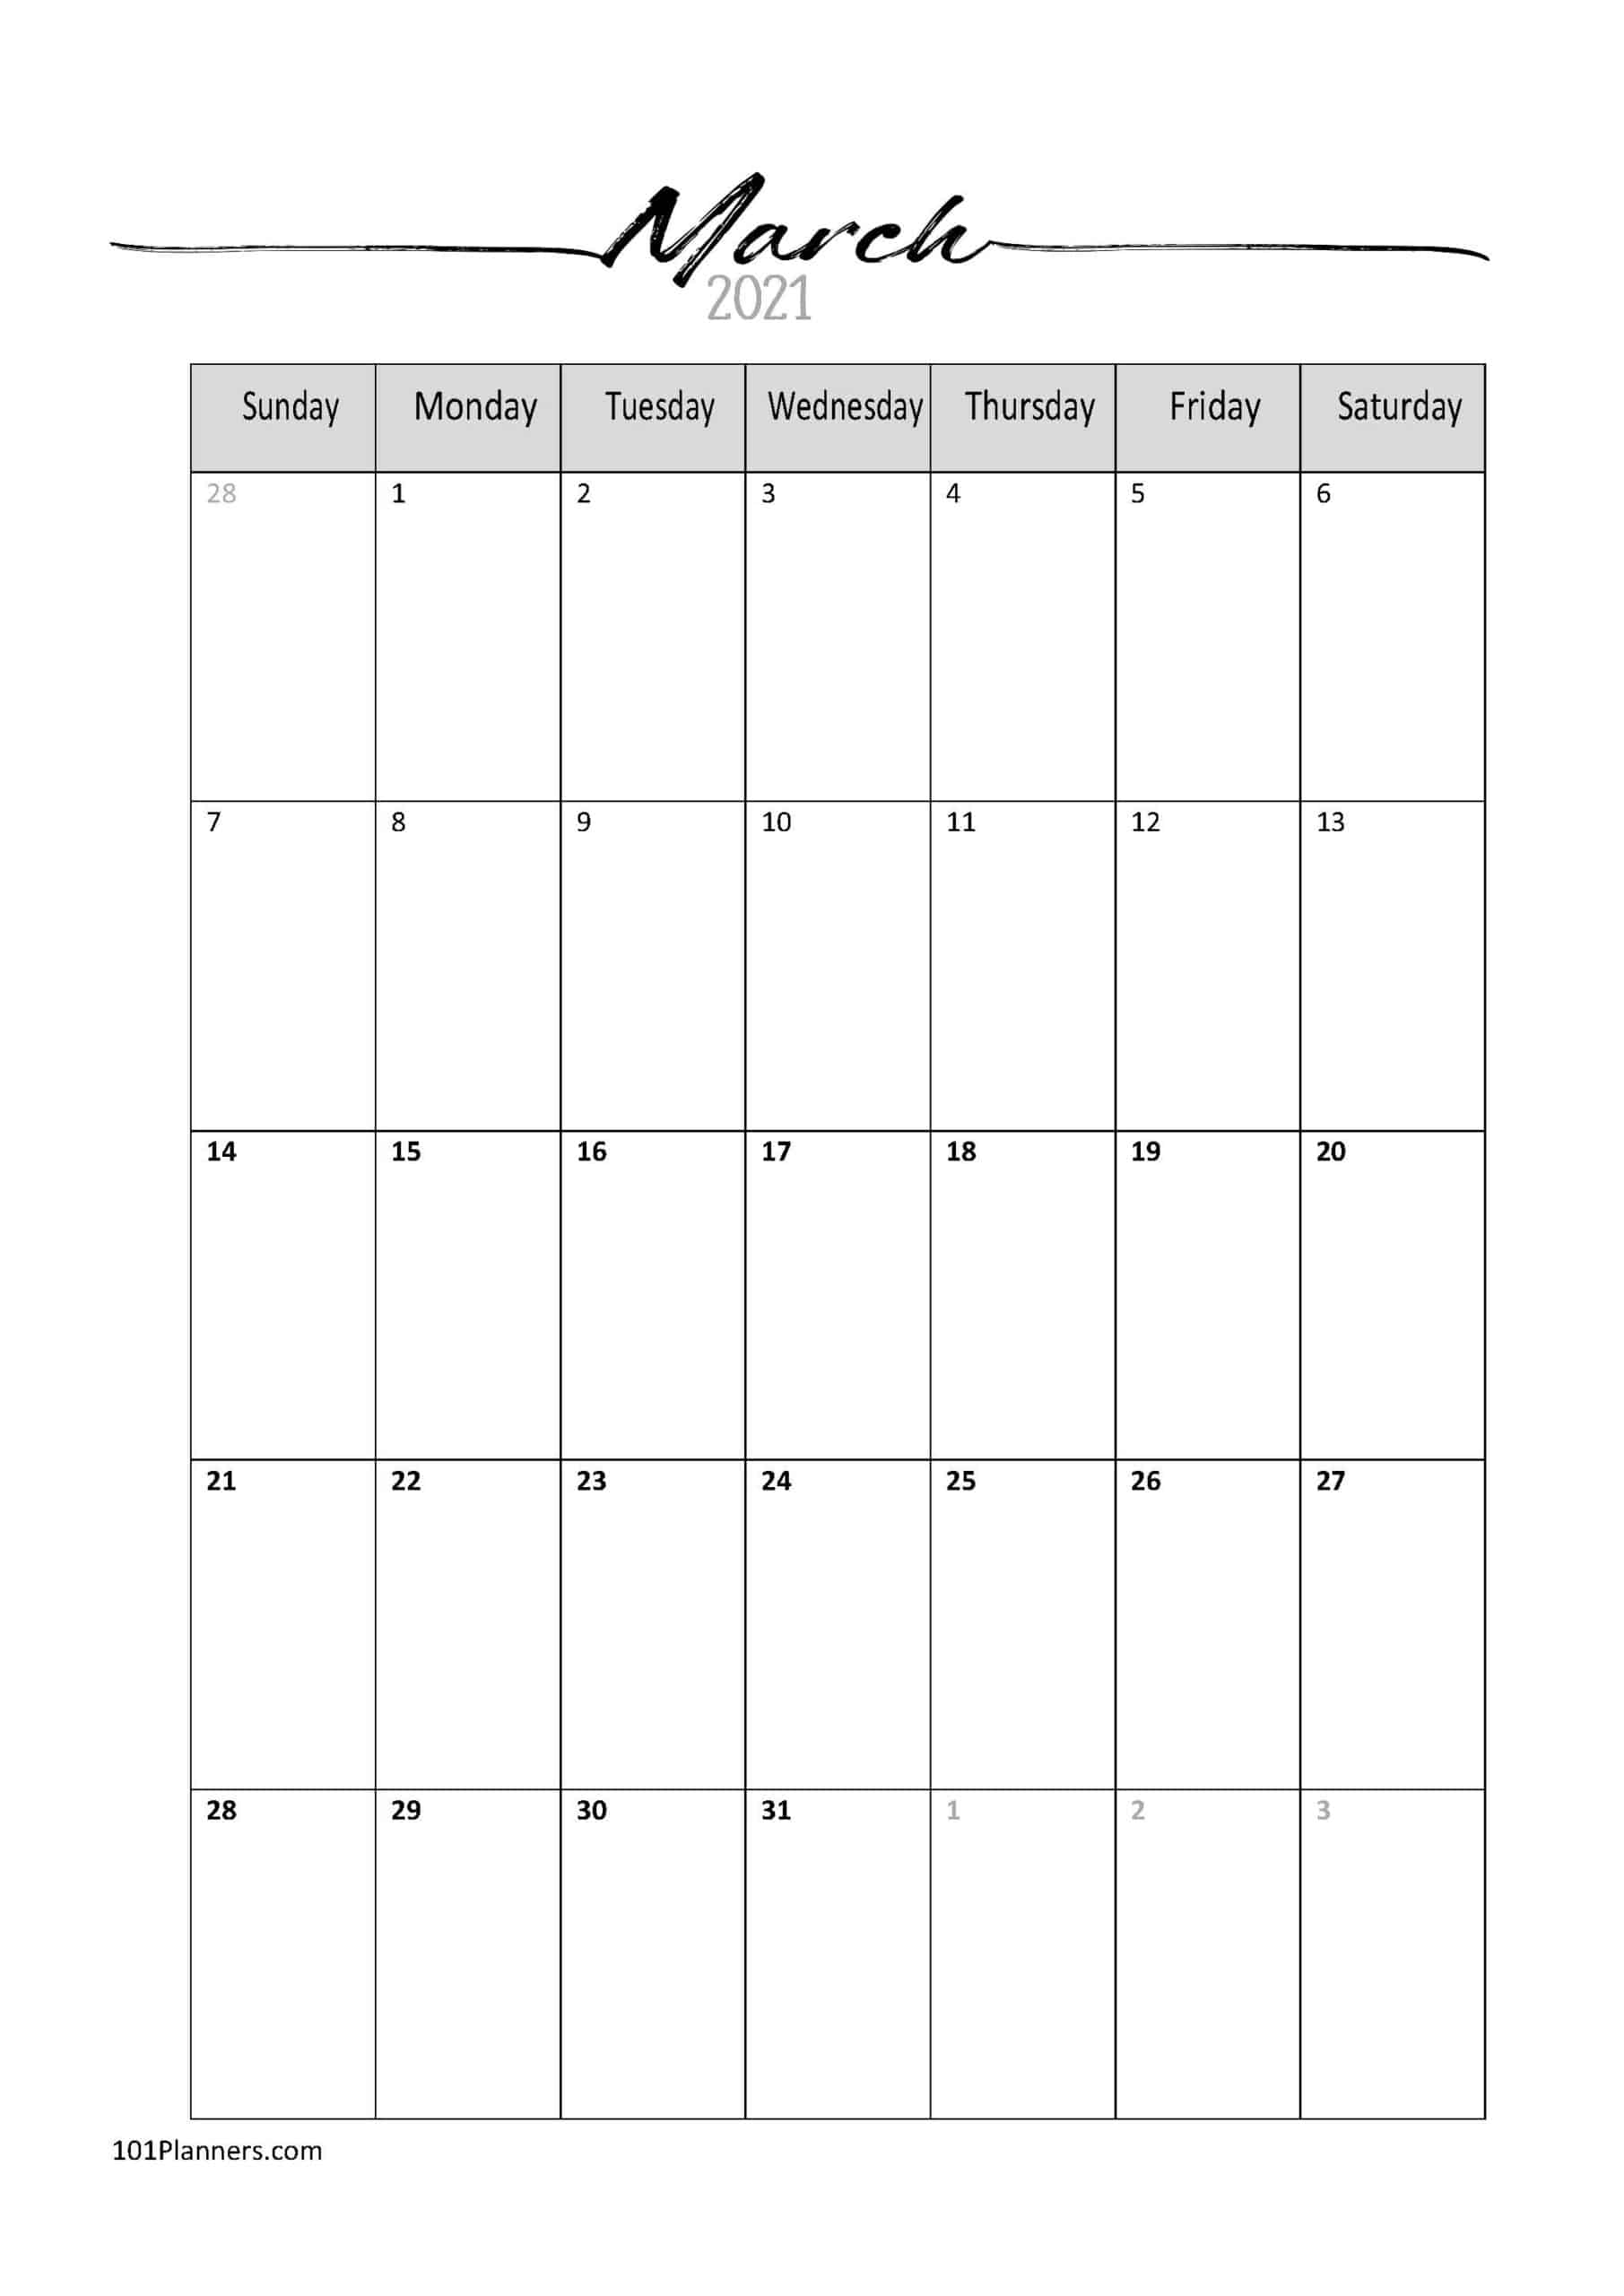 Free Printable March 2021 Calendar | Customize Online